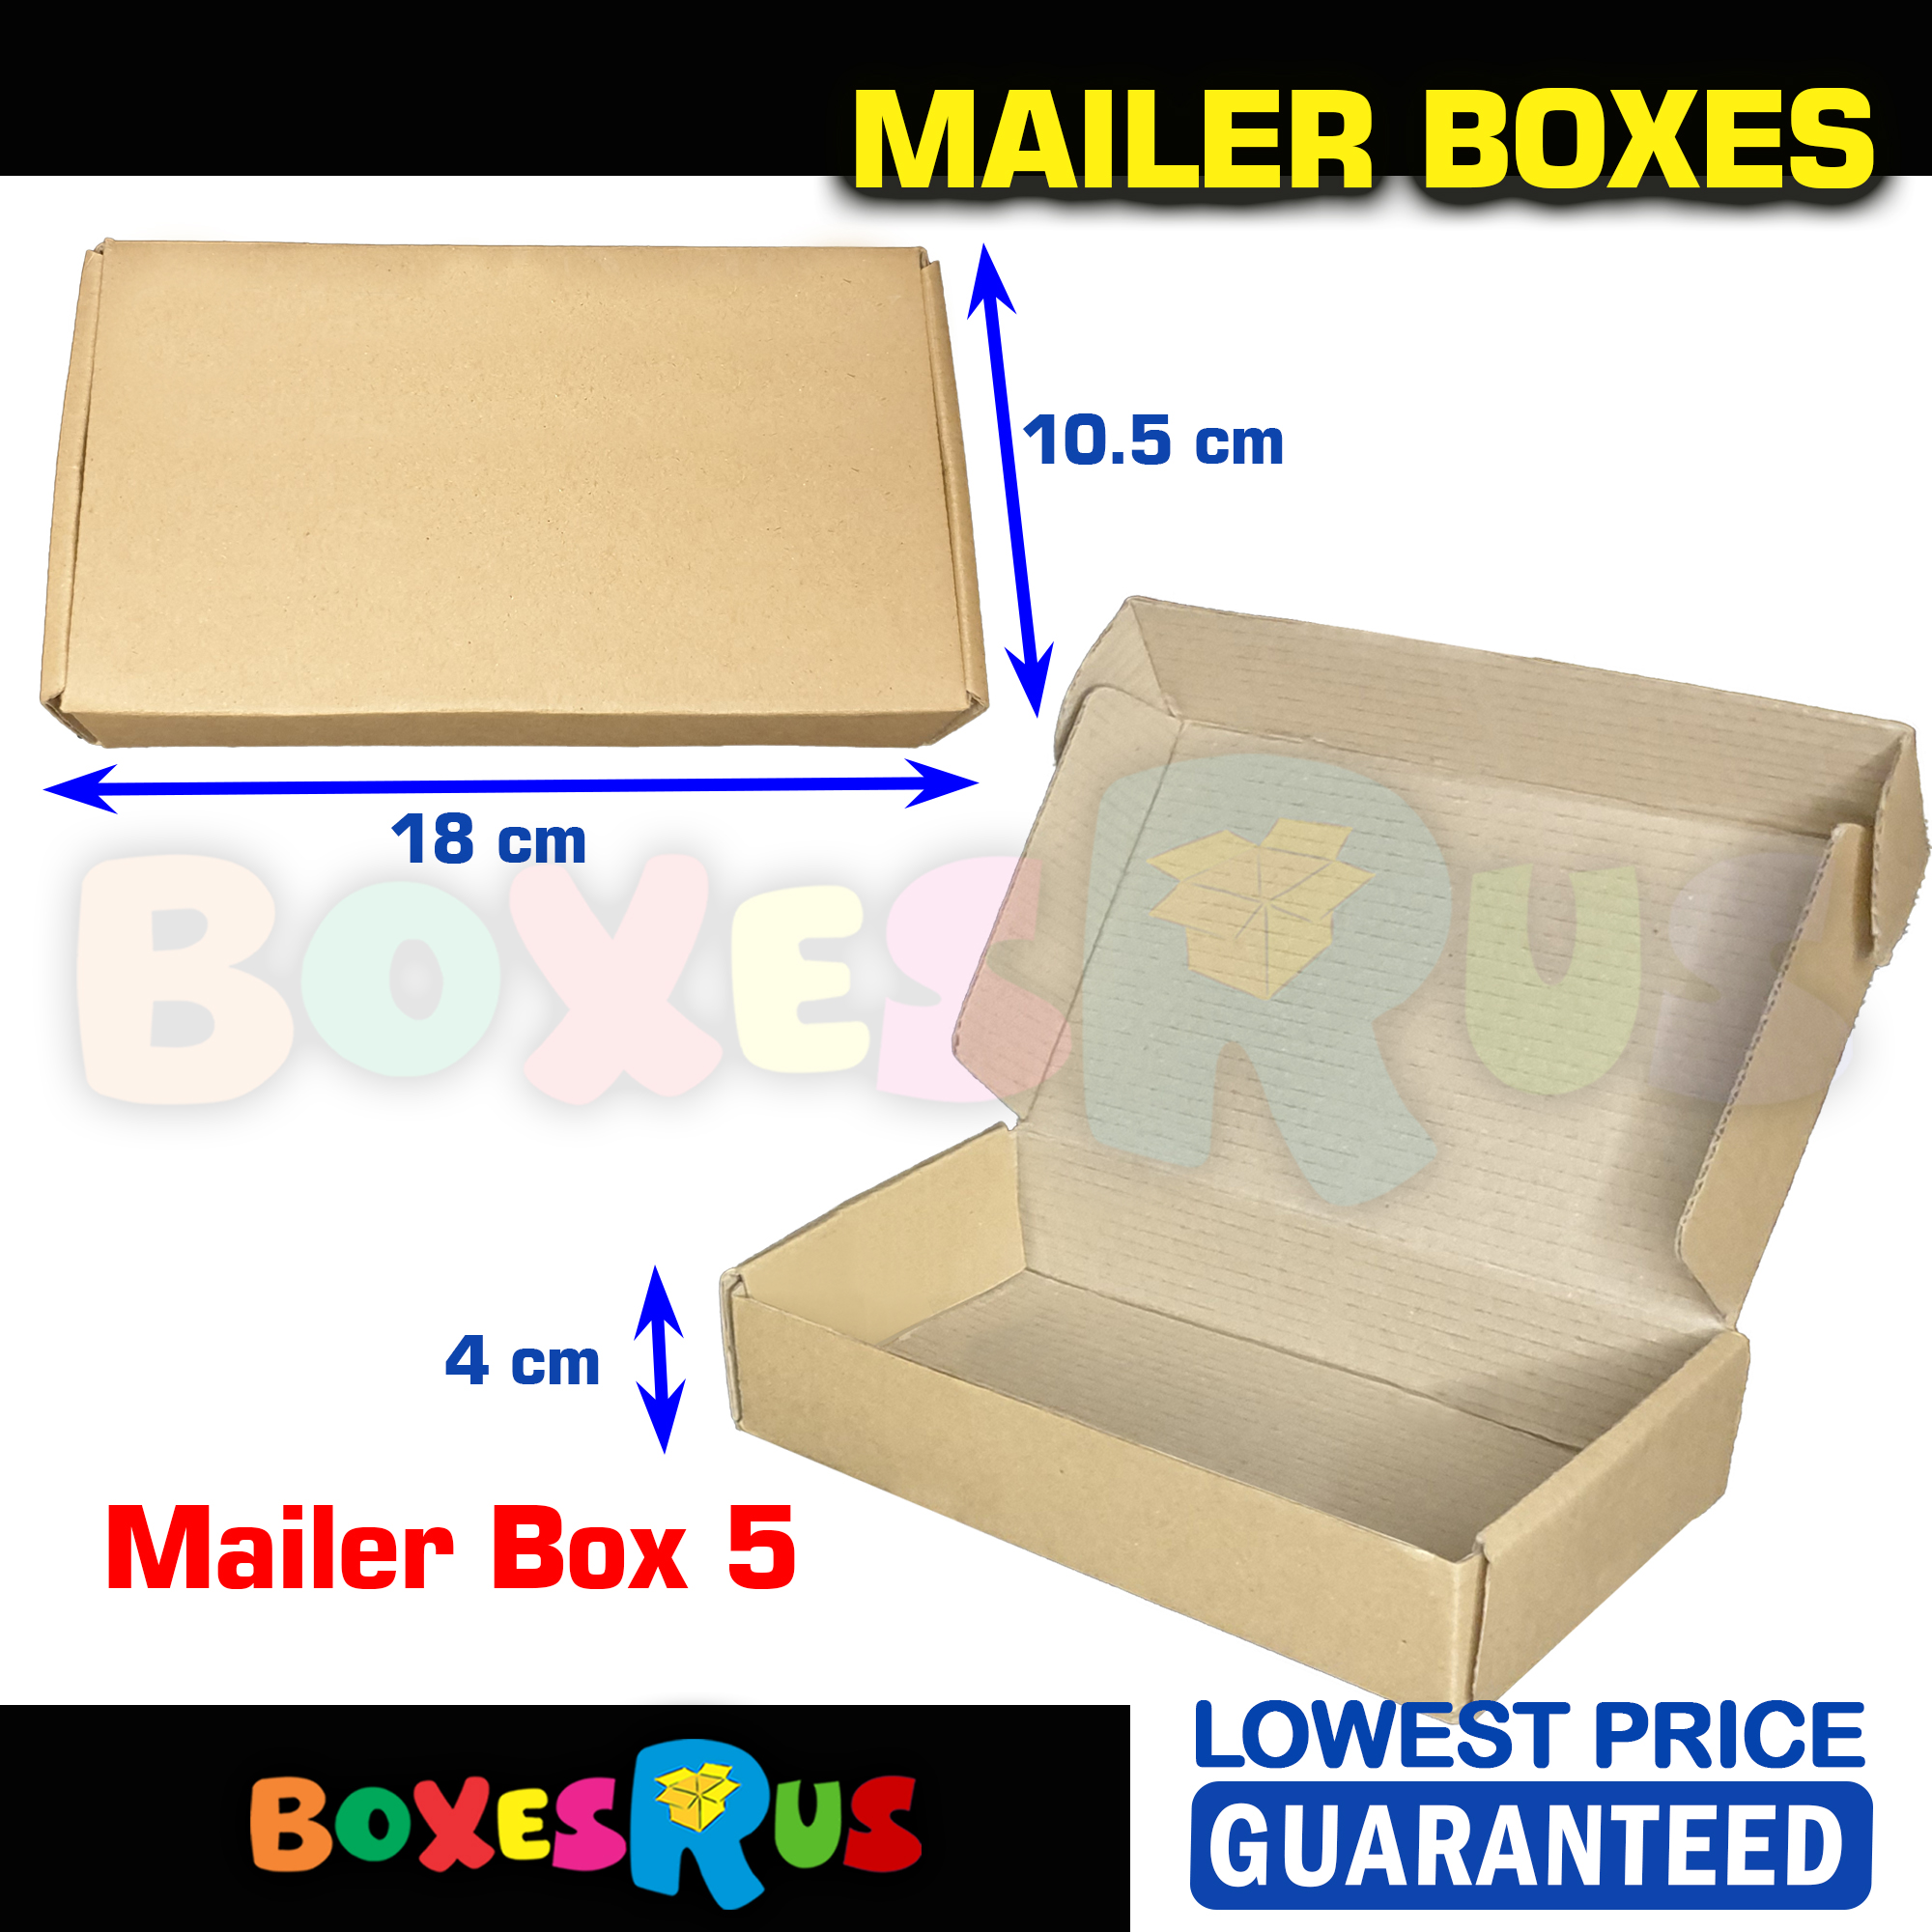 Cardboard Sheets Corrugated Pads Medium or Large Size for Packaging DIY  Letter Standee Kraft Paper by Boxes R Us